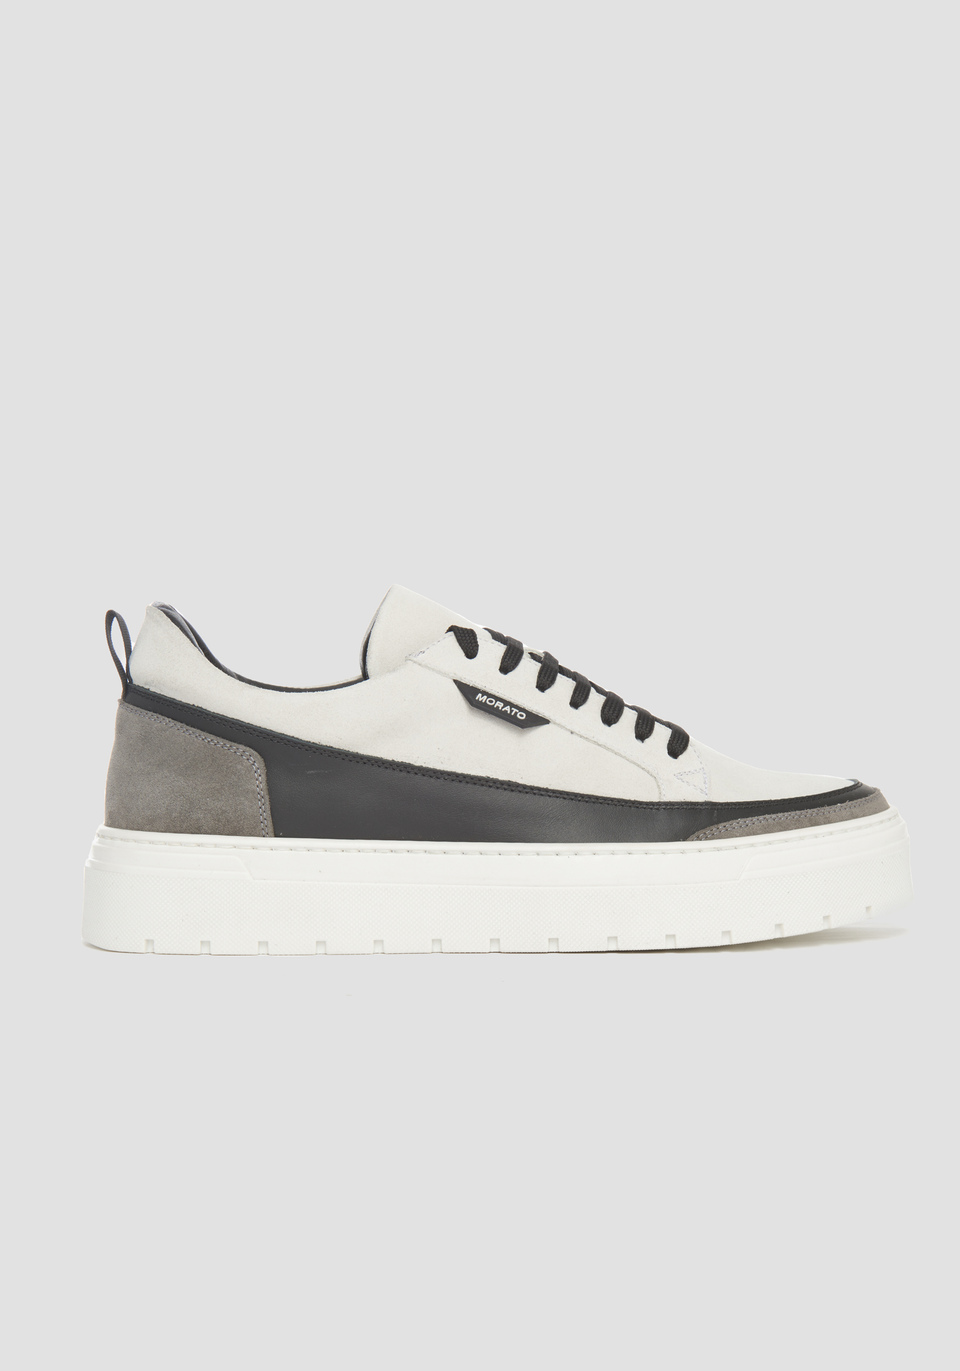 "FLINT" SNEAKERS IN SUEDE WITH LEATHER DETAILS - Antony Morato Online Shop